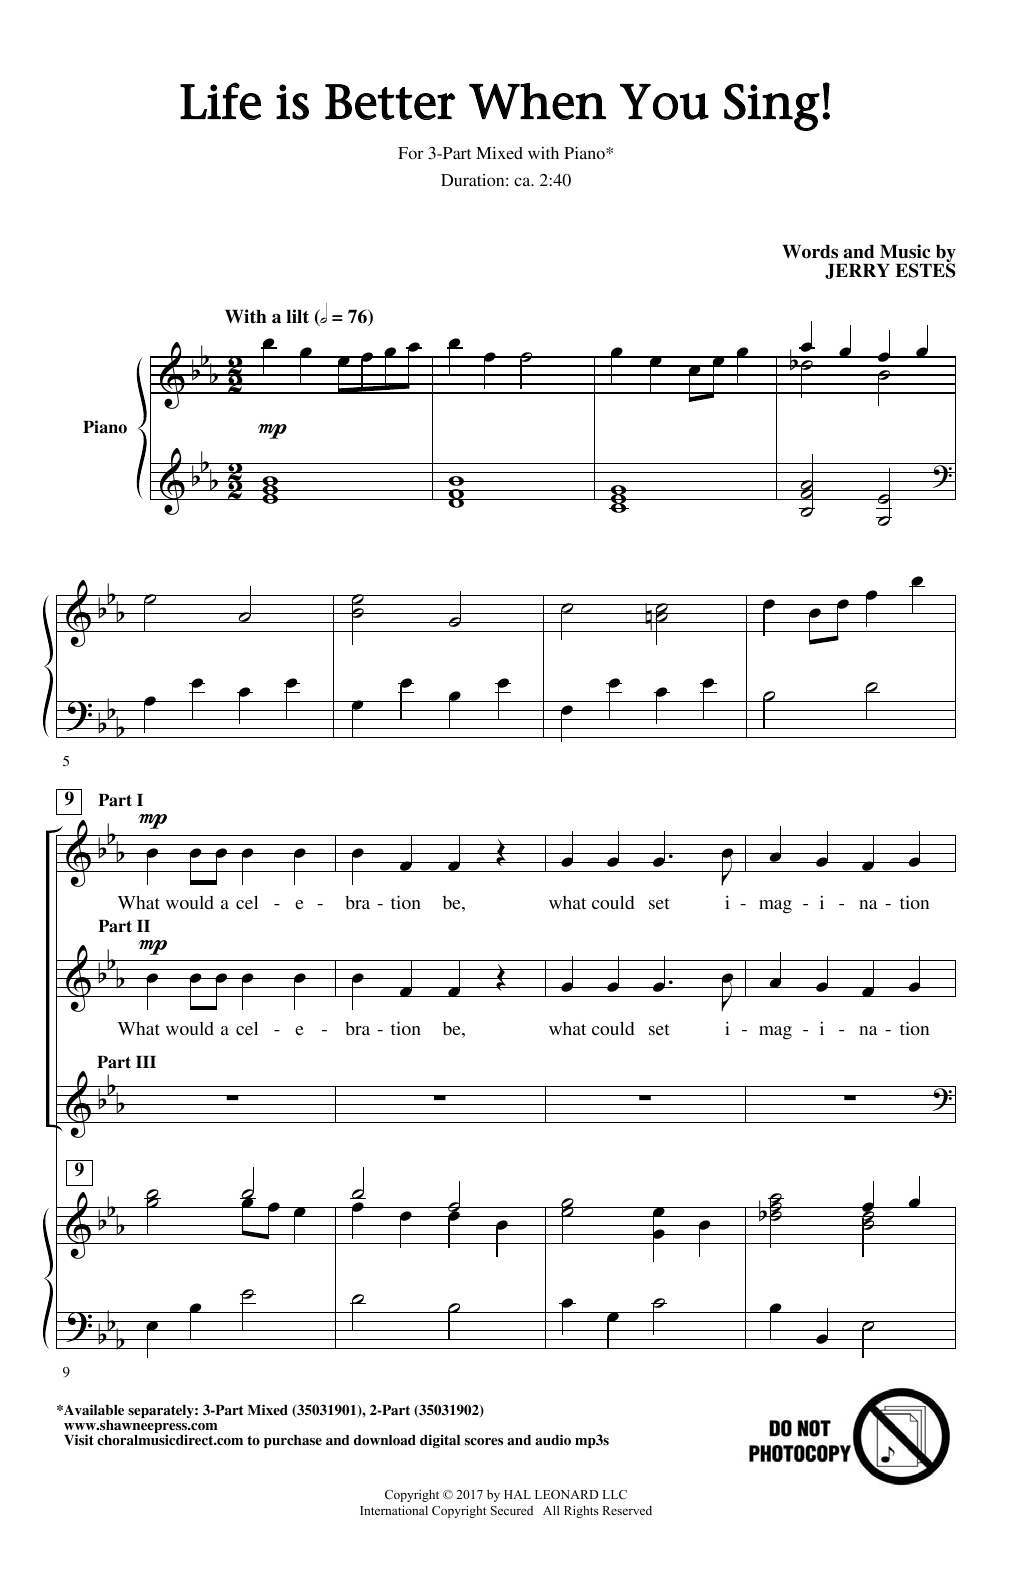 Download Jerry Estes Life Is Better When You Sing! Sheet Music